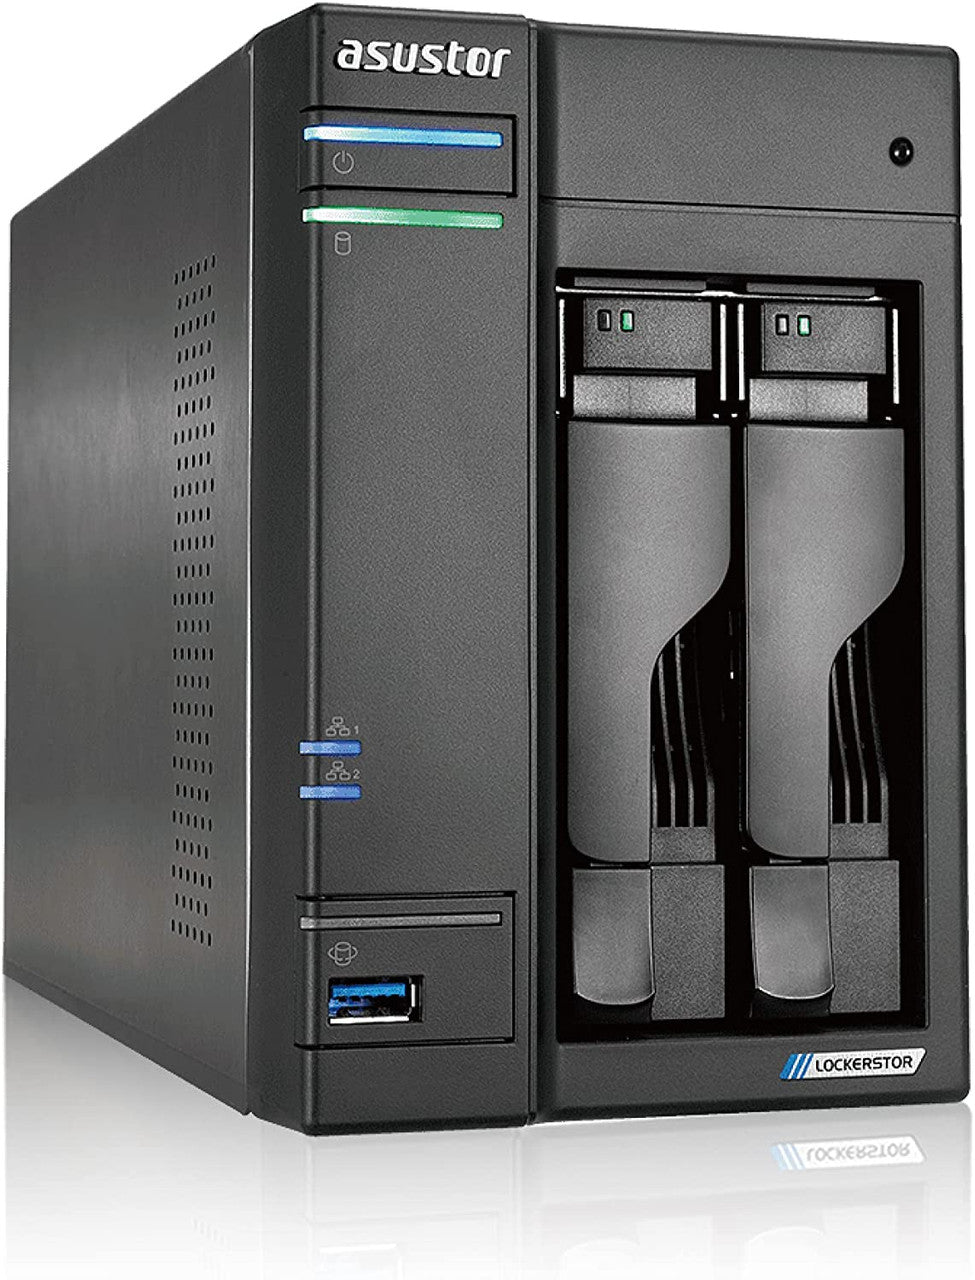 Asustor AS6602T 2-Bay Lockerstor 2 NAS with 8GB RAM and 12TB (2x6TB) Seagate Ironwolf NAS Drives